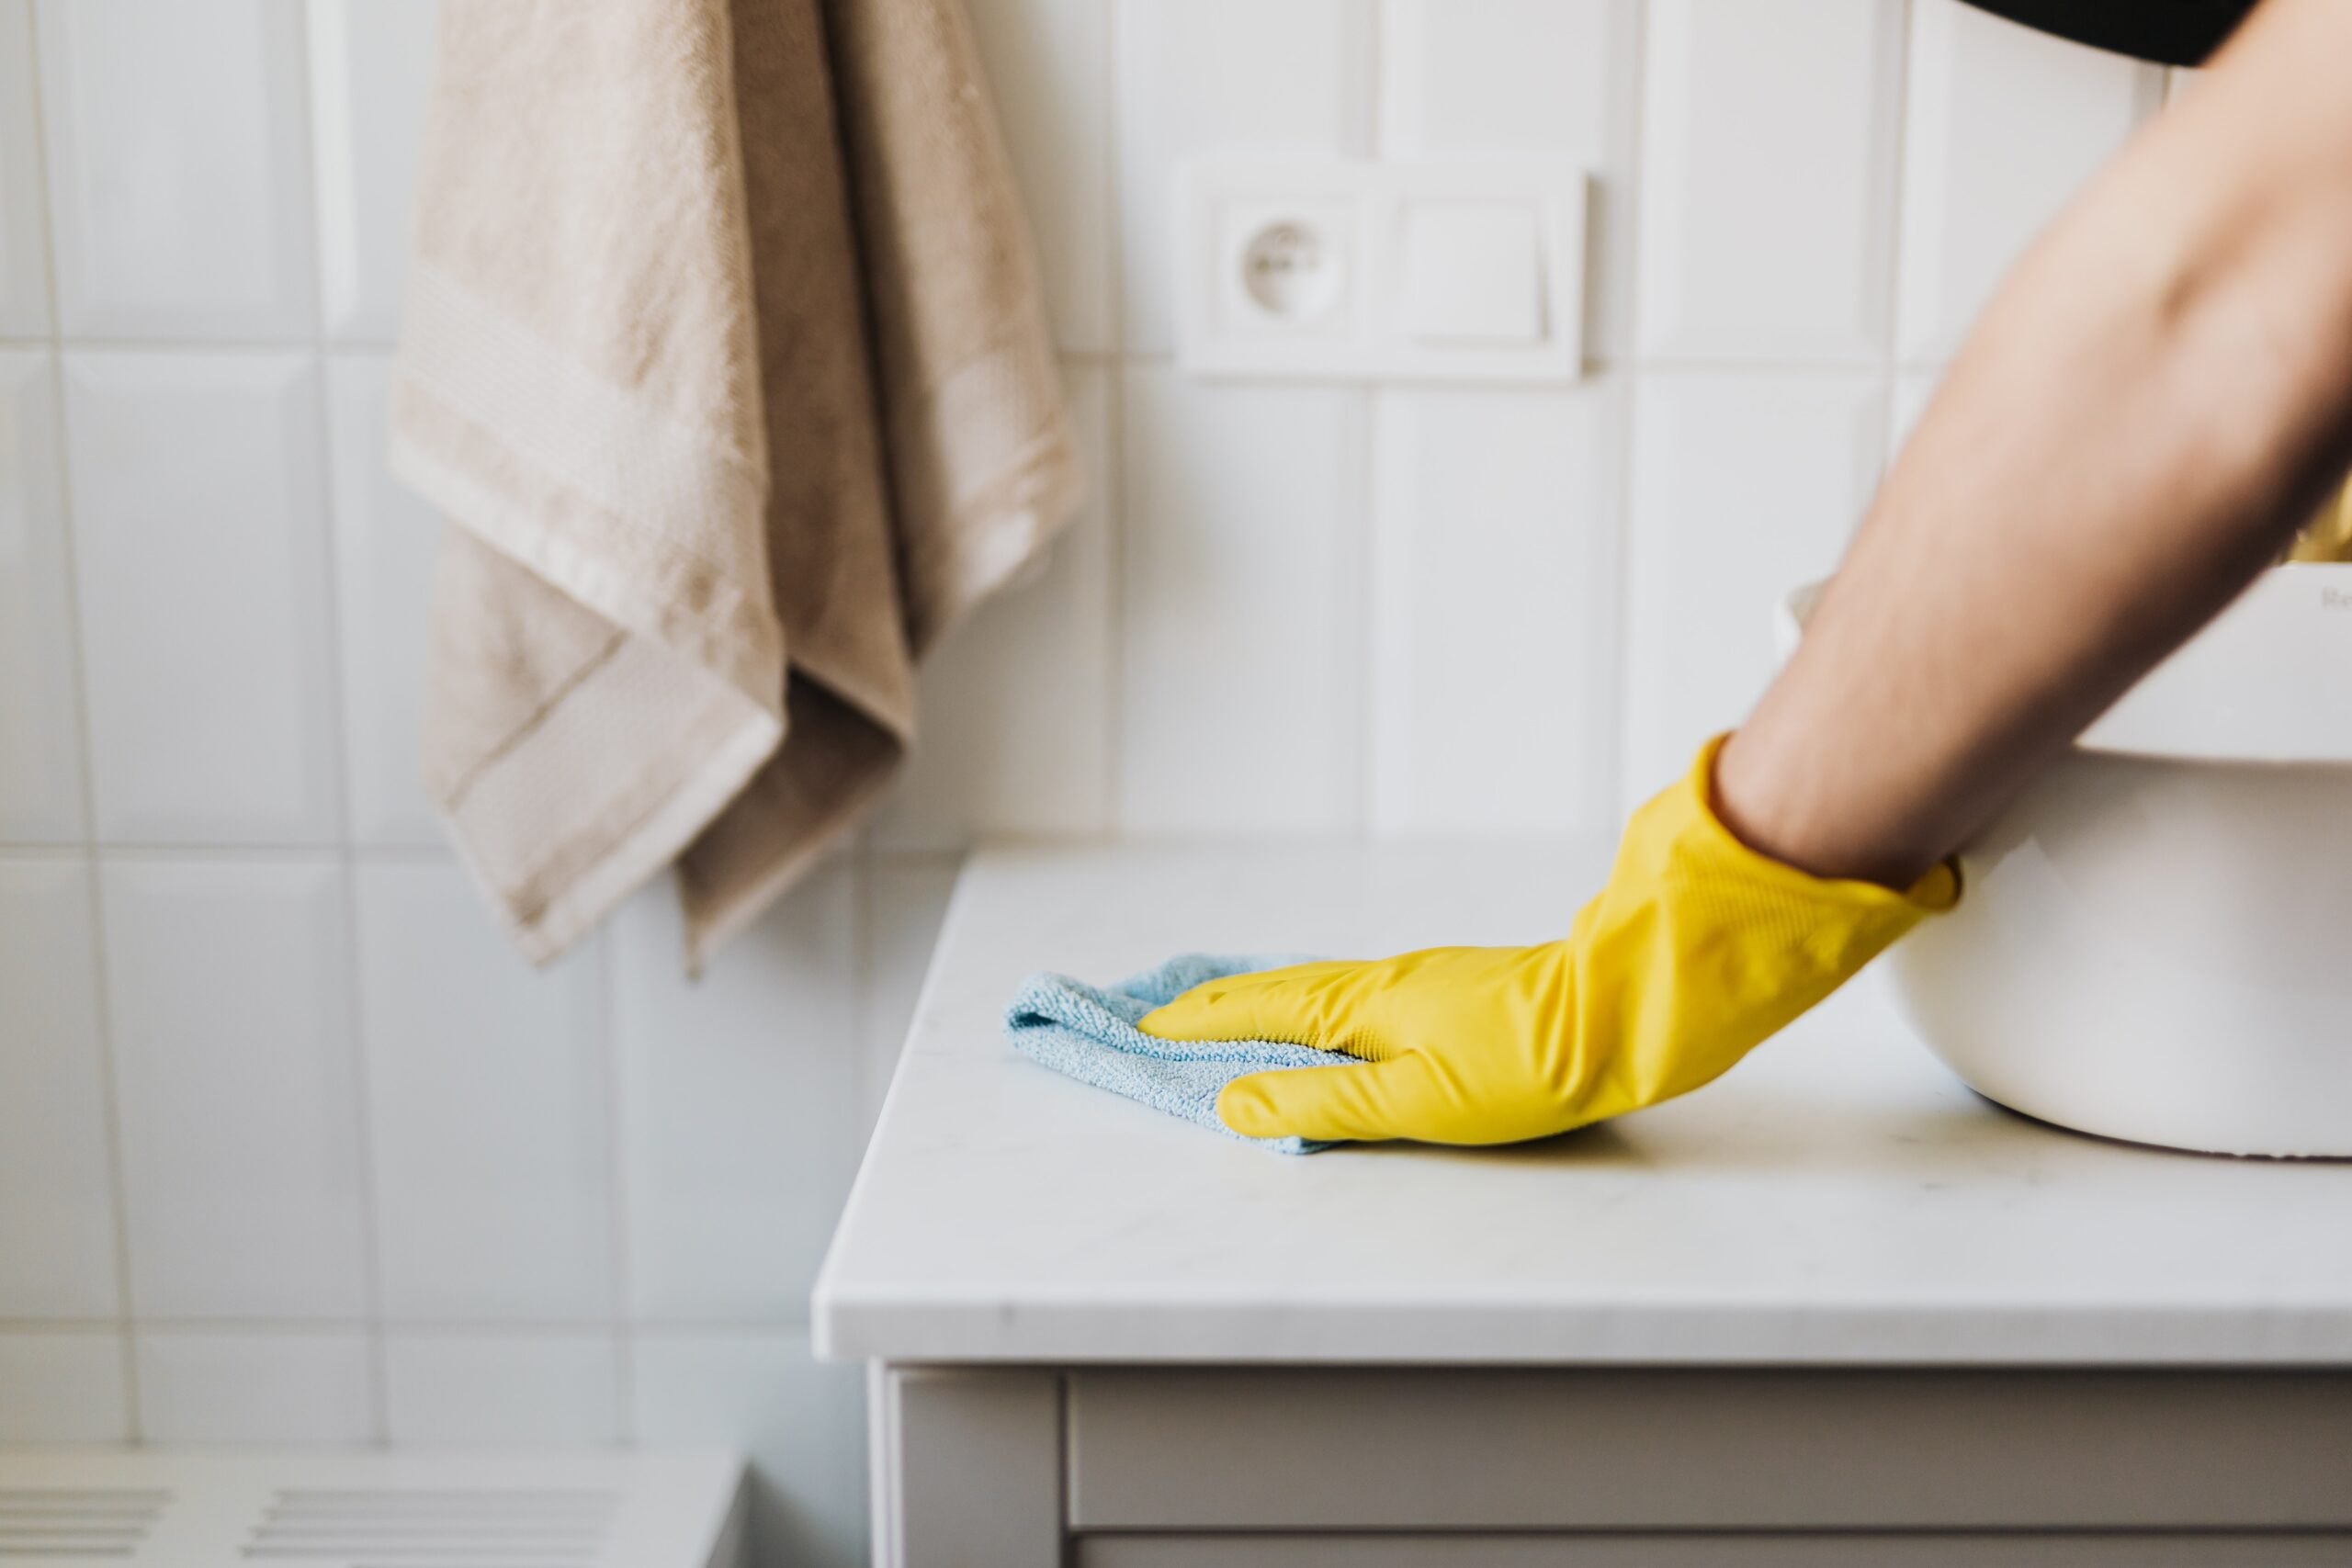 Hiring a House Cleaner During COVID-19